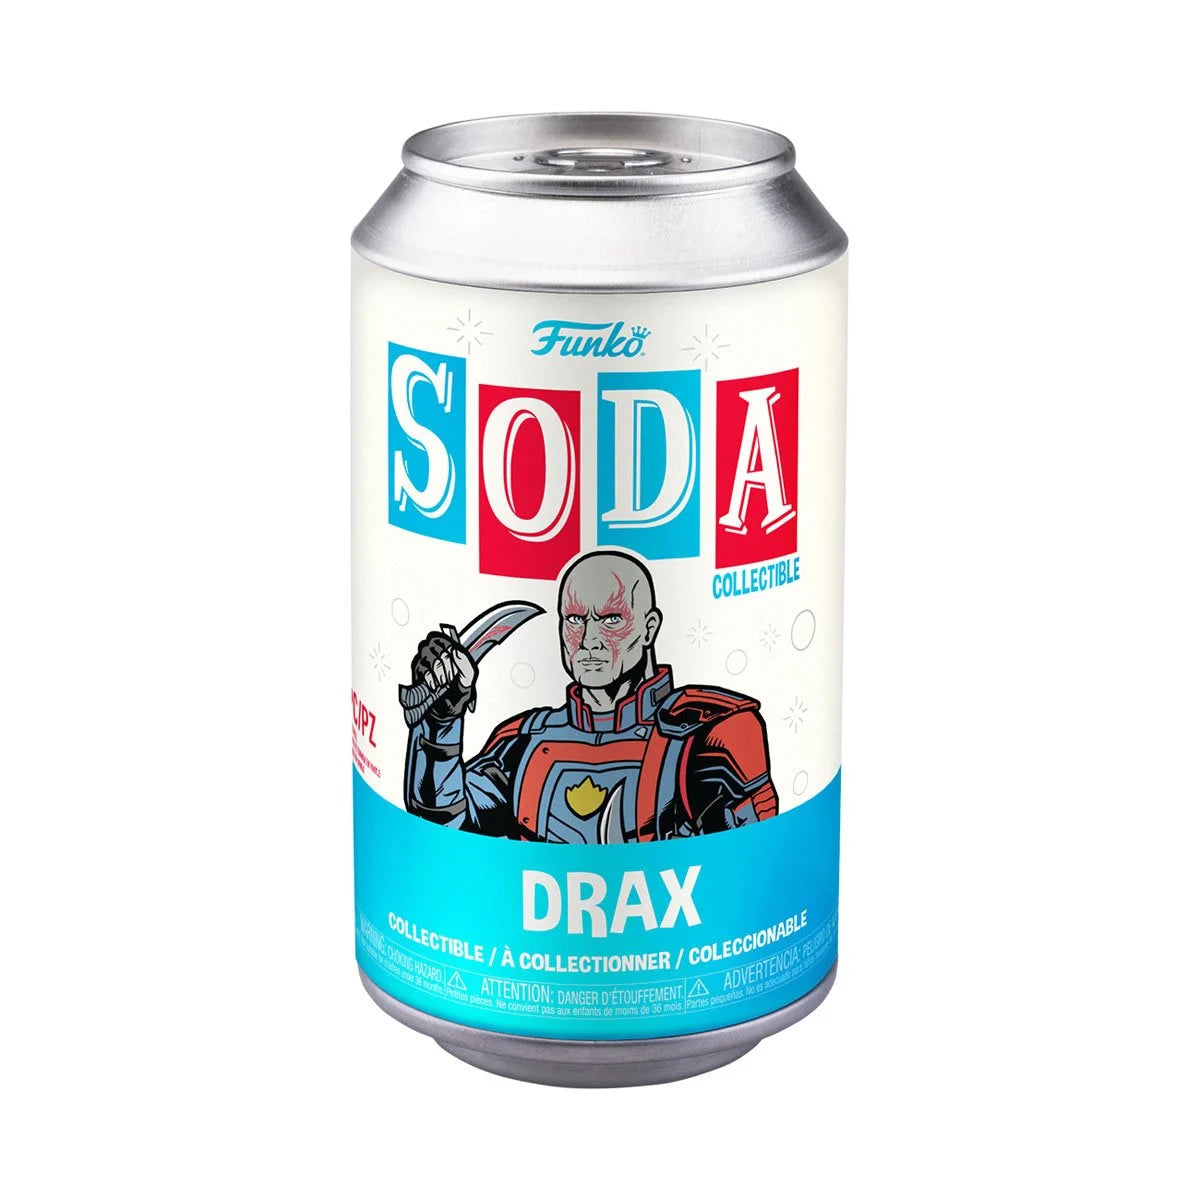 Drax Guardians of the Galaxy Volume 3 Funko Vinyl Soda w/ Chance of chase!